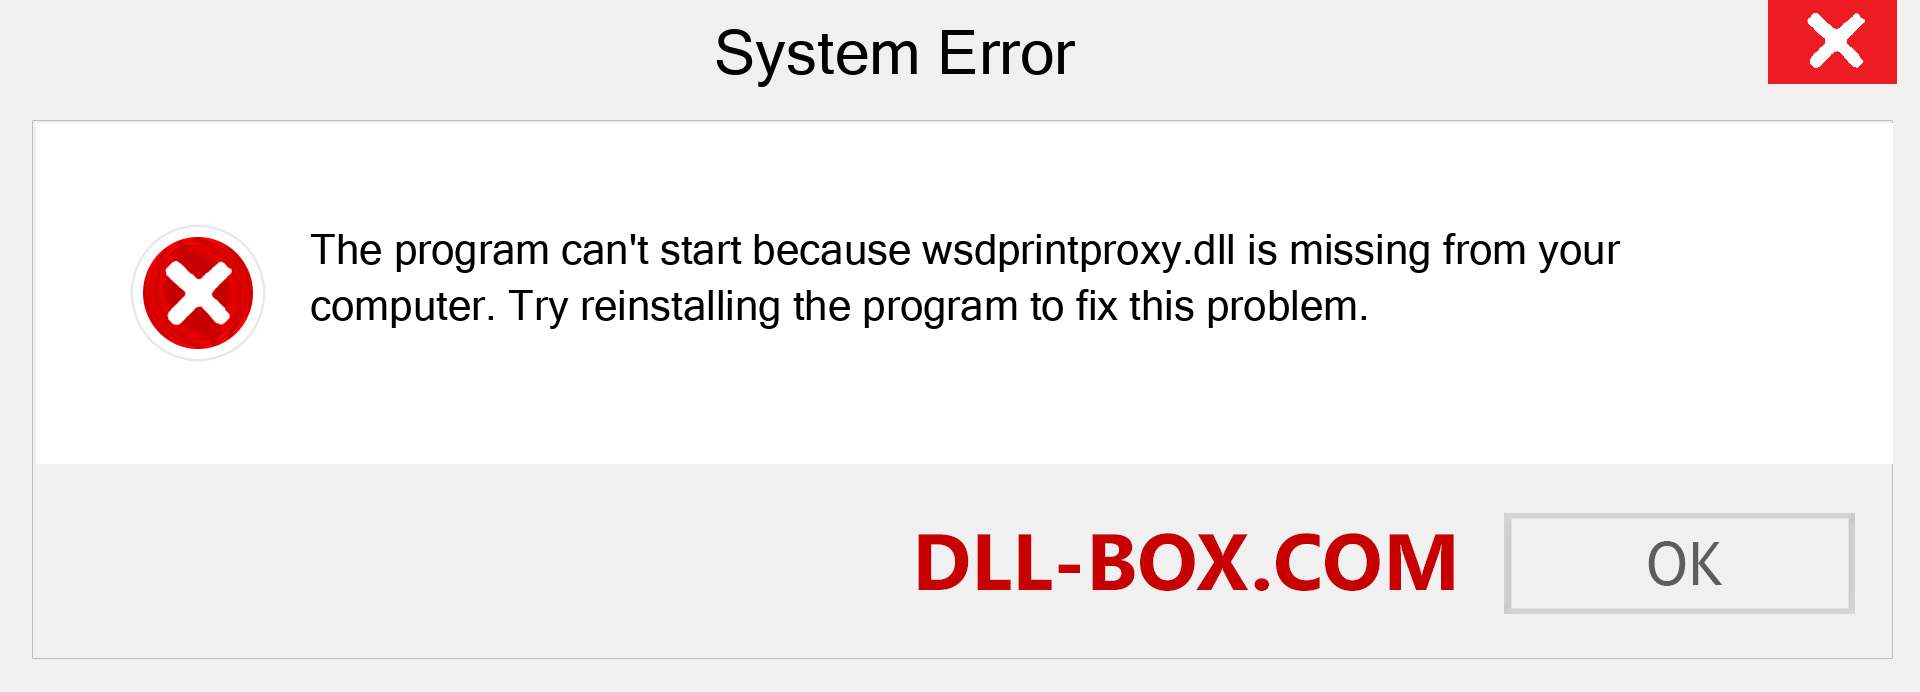  wsdprintproxy.dll file is missing?. Download for Windows 7, 8, 10 - Fix  wsdprintproxy dll Missing Error on Windows, photos, images